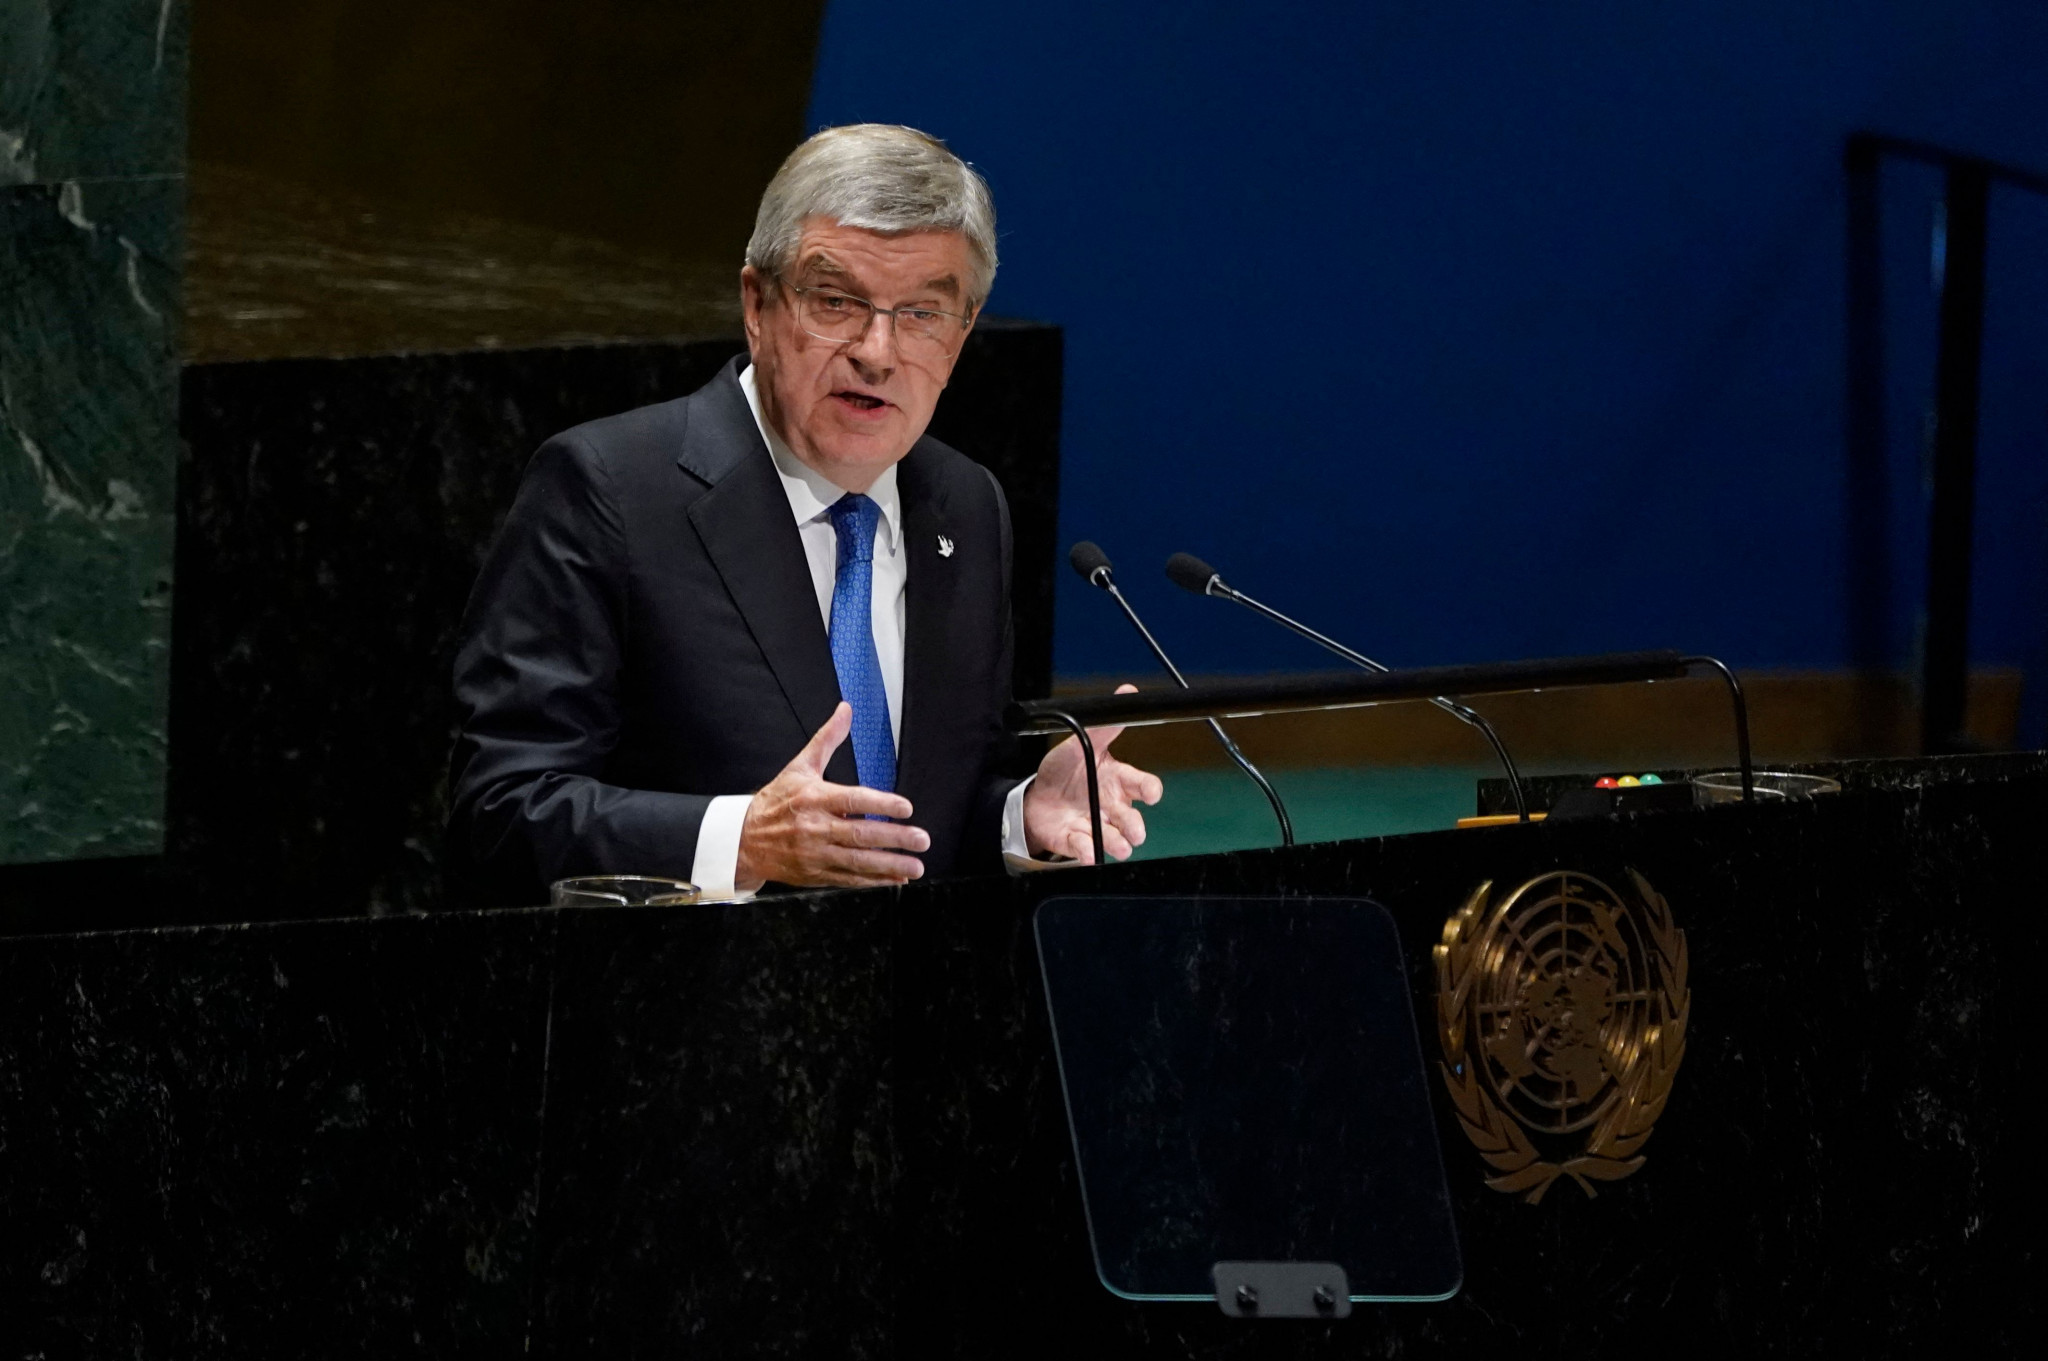 Thomas Bach, President of International Olympic Committee speaks at the UN. © Getty Images